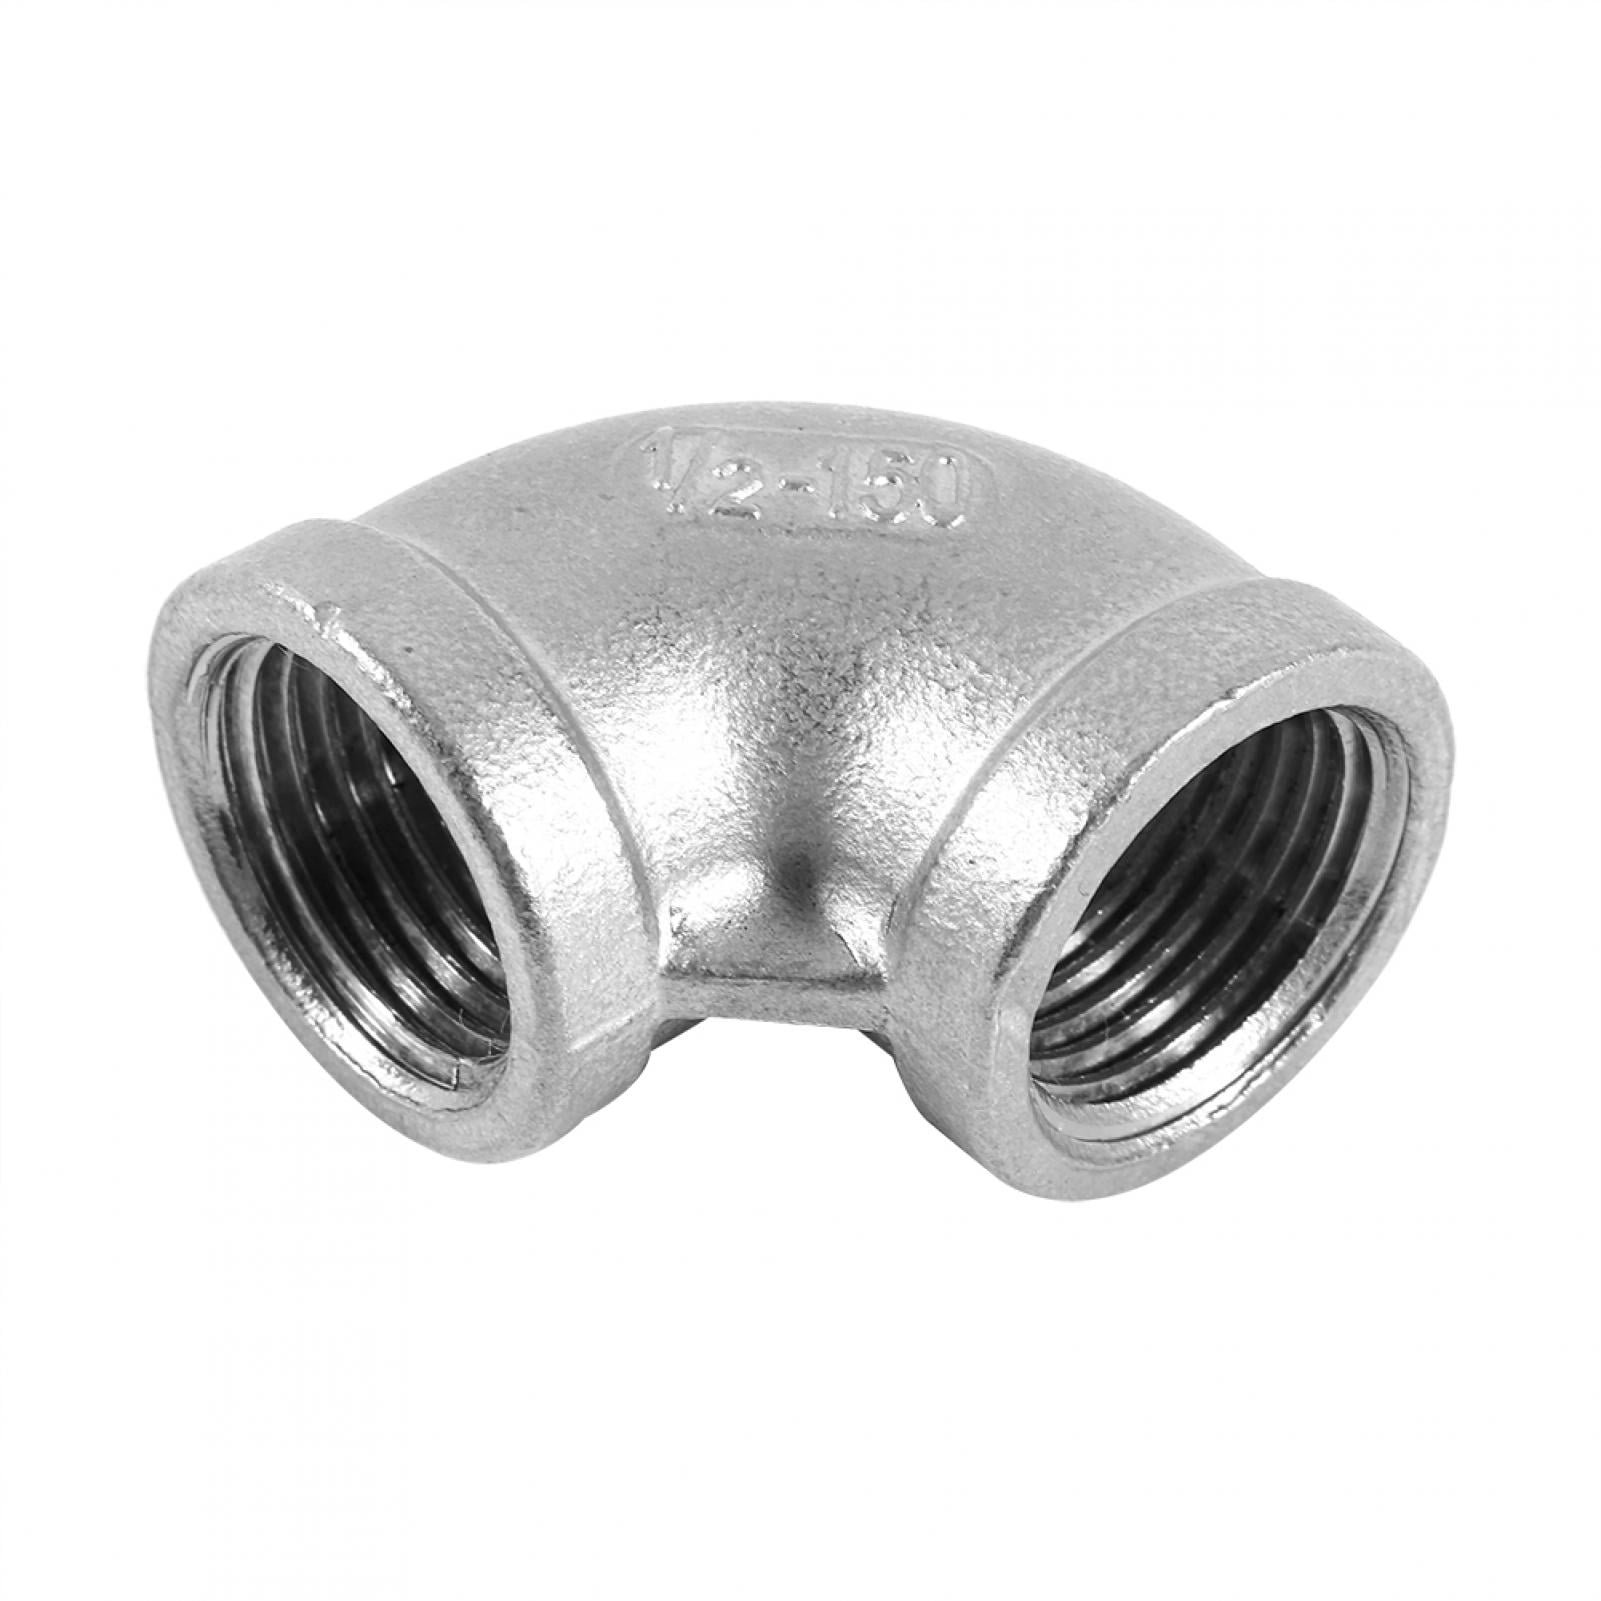 3/4" Elbow 90 Degree Angled Stainless Steel 304 Female Threaded Pipe Fitting NPT 